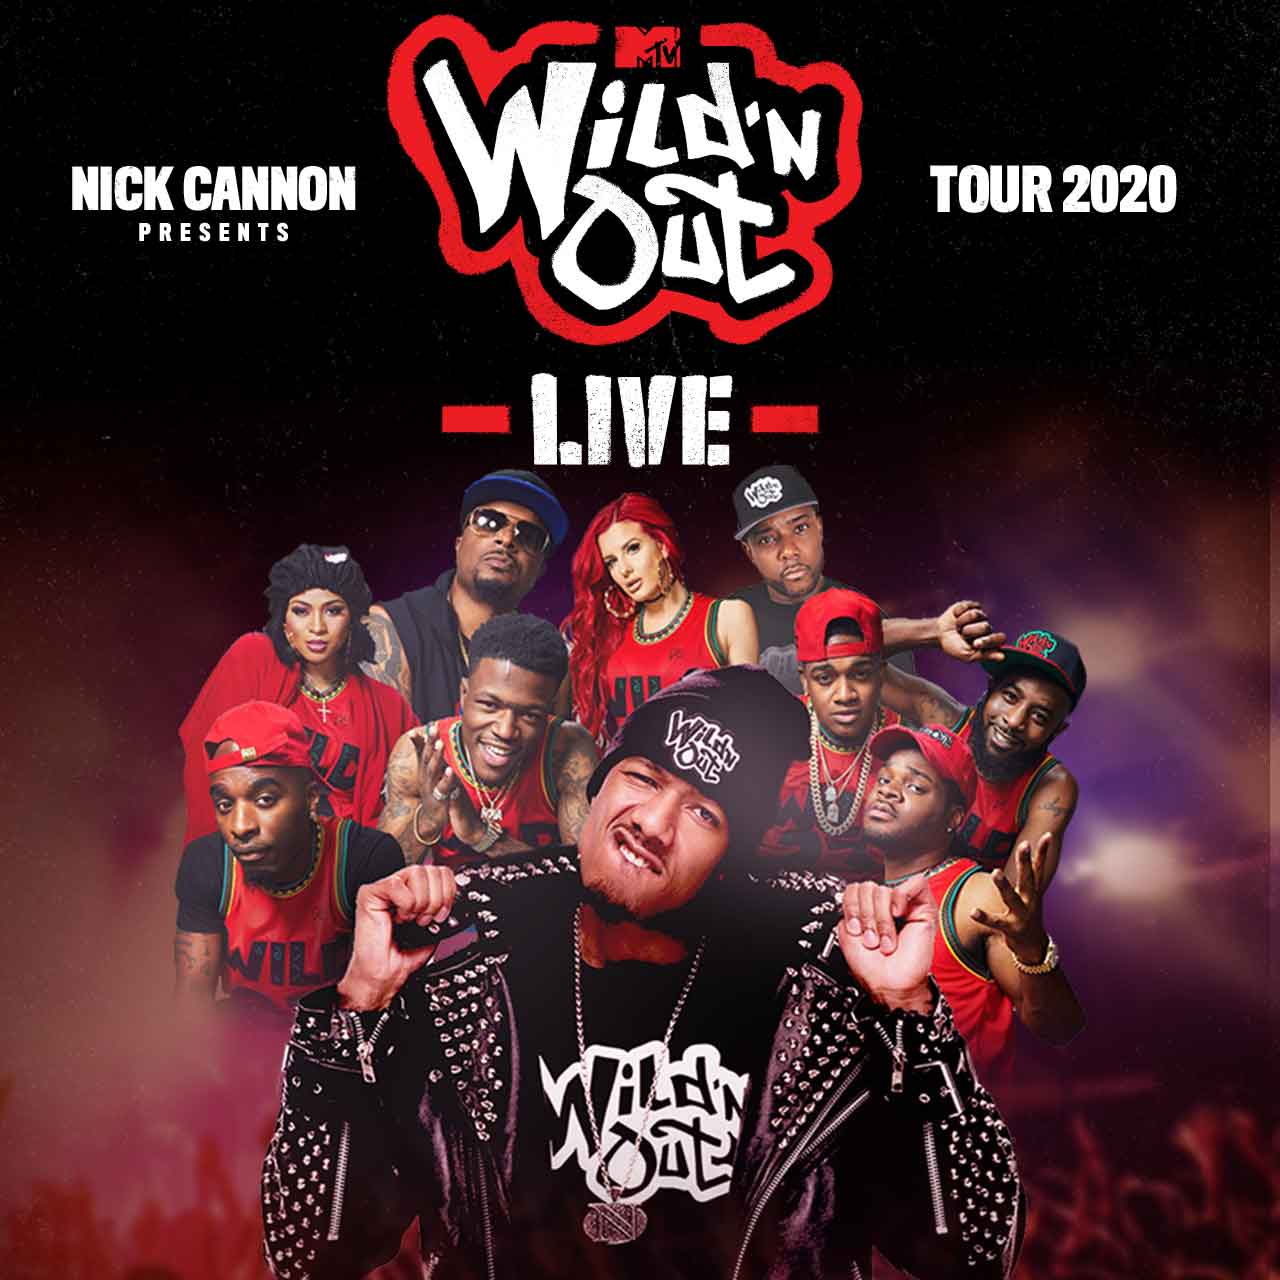 Nick Cannon Presents: MTV Wild 'N Out Live